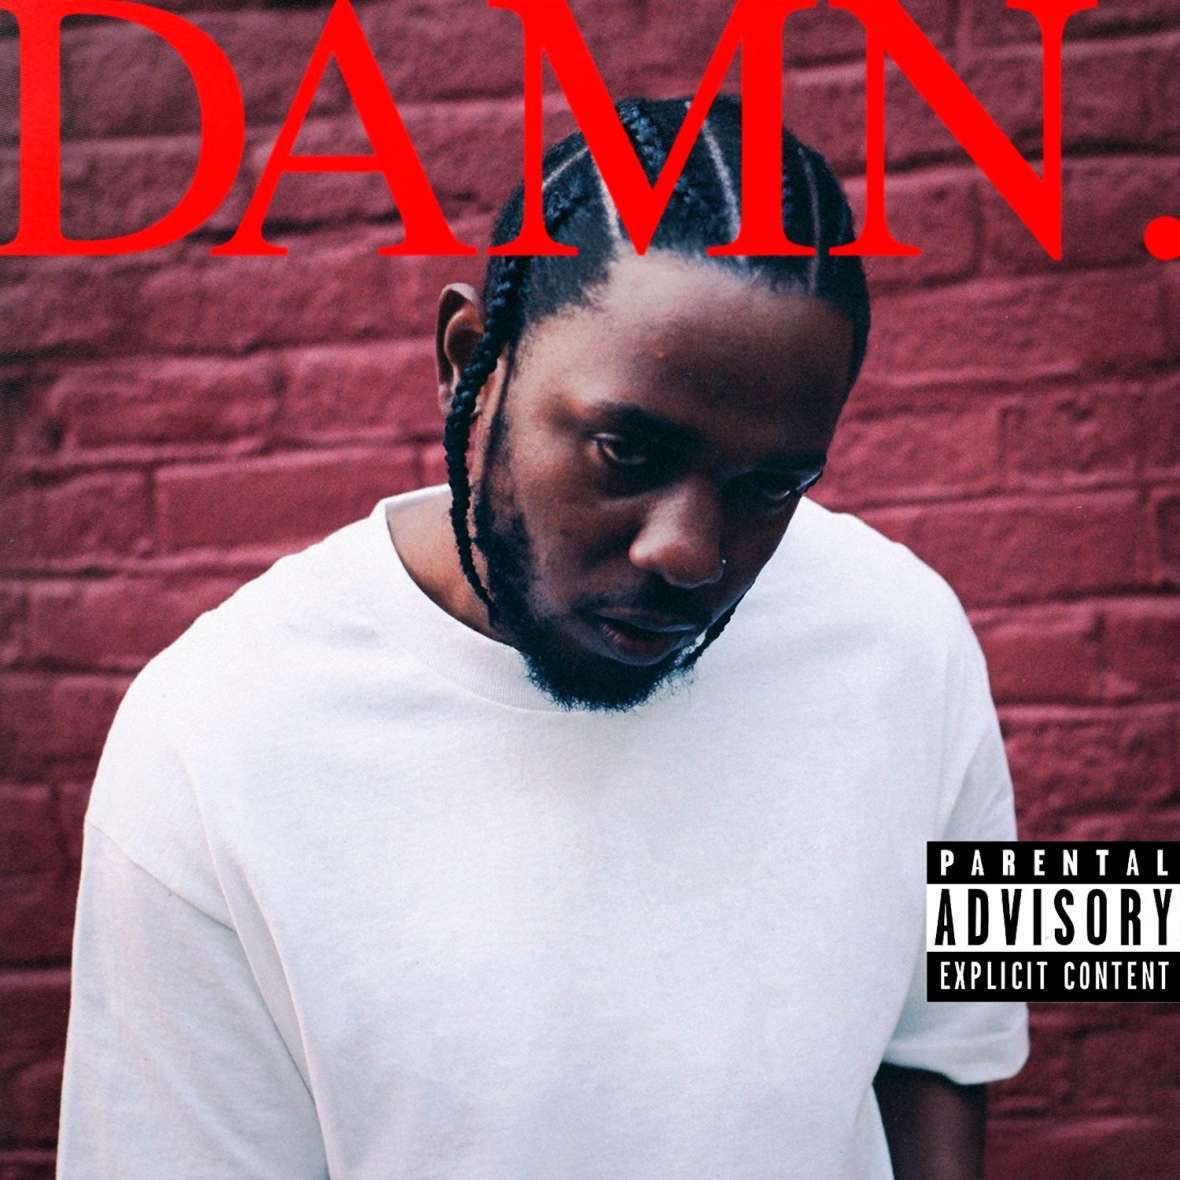 Congratulations to @kendricklamar on being a #PulitzerPrize winner for his album “DAMN”. https://t.co/O5Ly1Kqt41